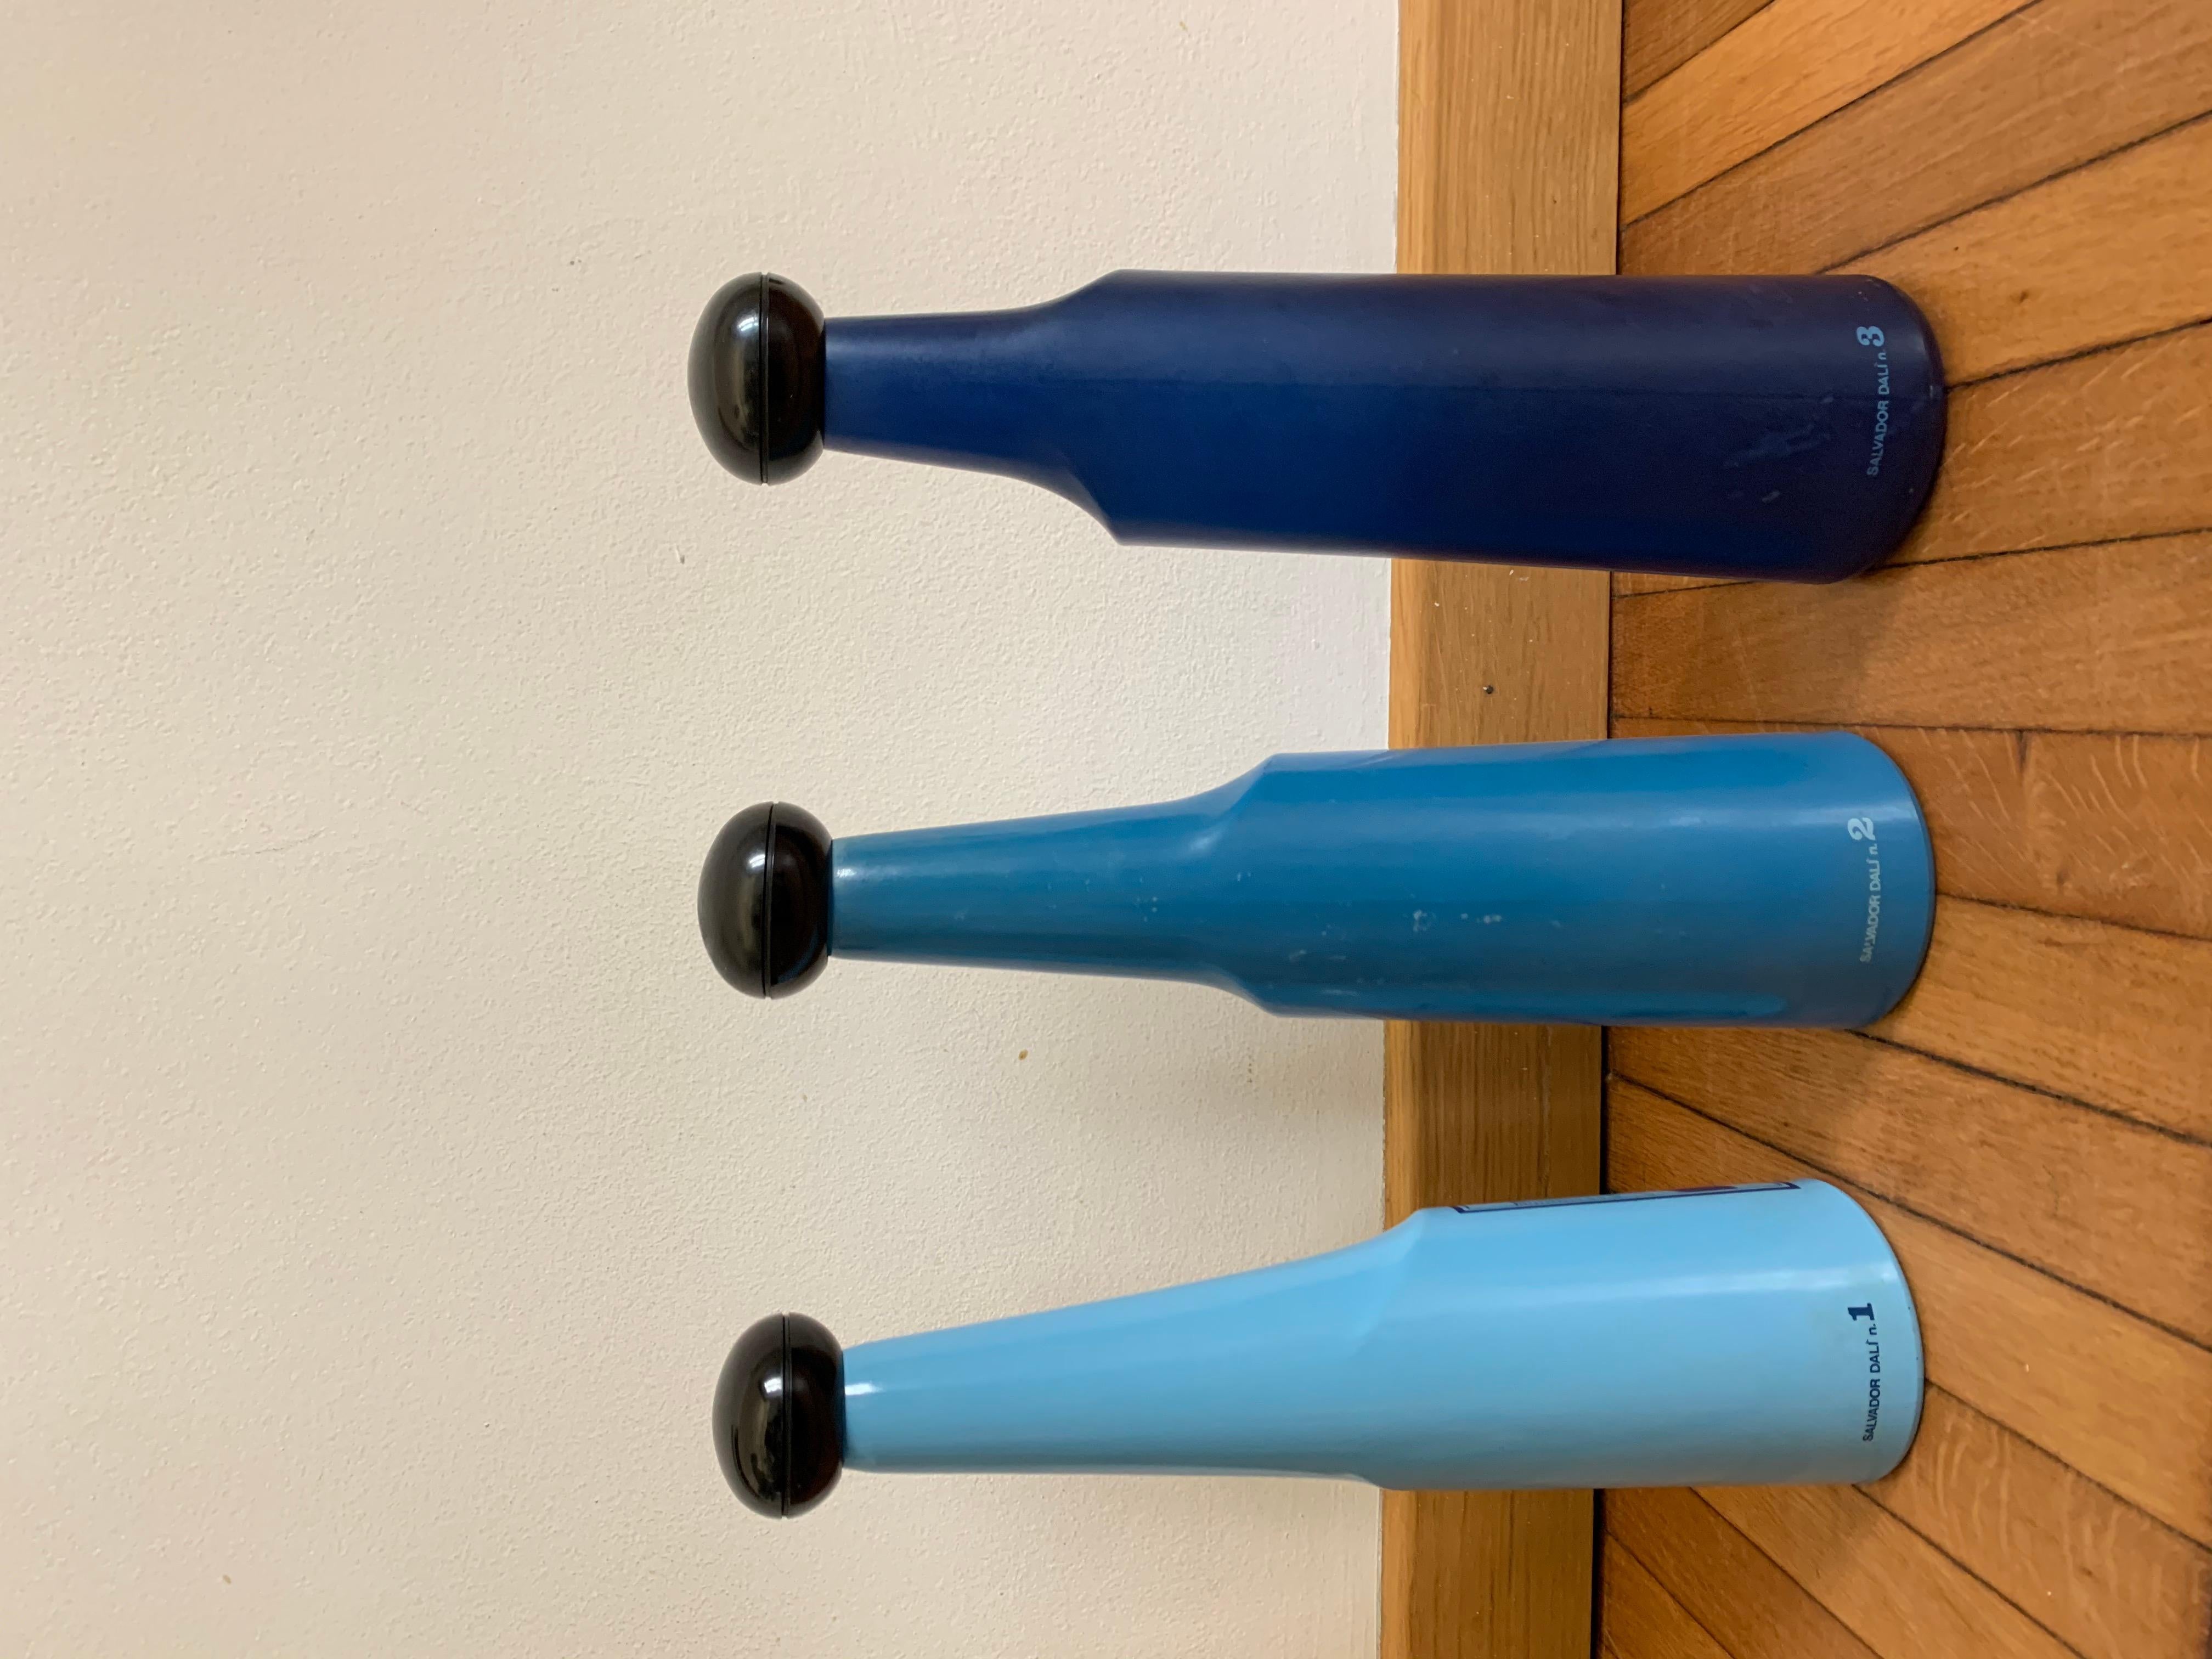 Vintage Rosso Antico set of 3 colored glass bottles: Surrealist Design Italian and Spanish Art 1970s by Salvador Dali.
Each bottle has a different serigraphed image created by the Spanish painter Salvador Dalí for the Italian liquor company 